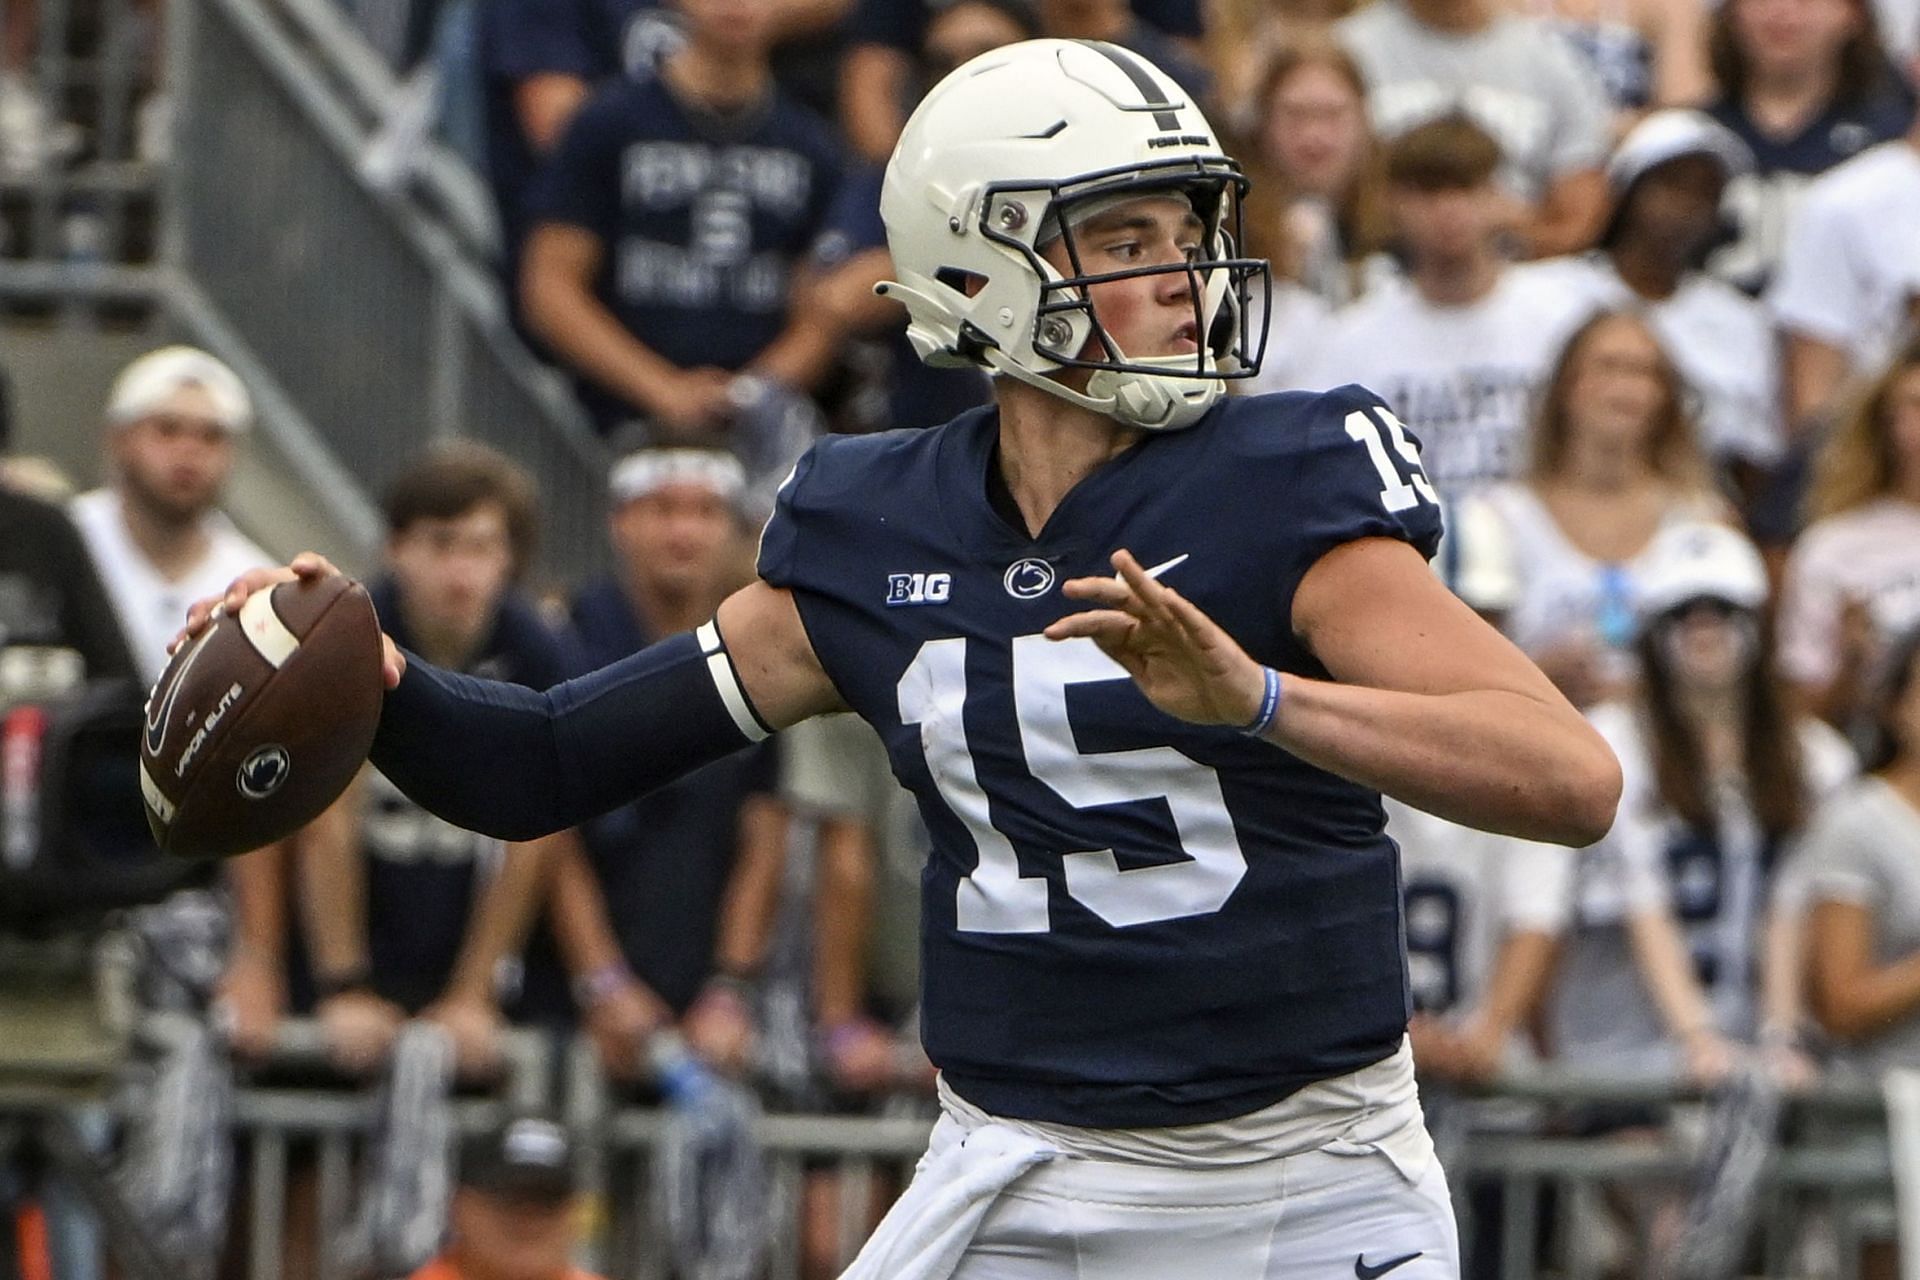 Drew Allar, the future of the Nittany Lions